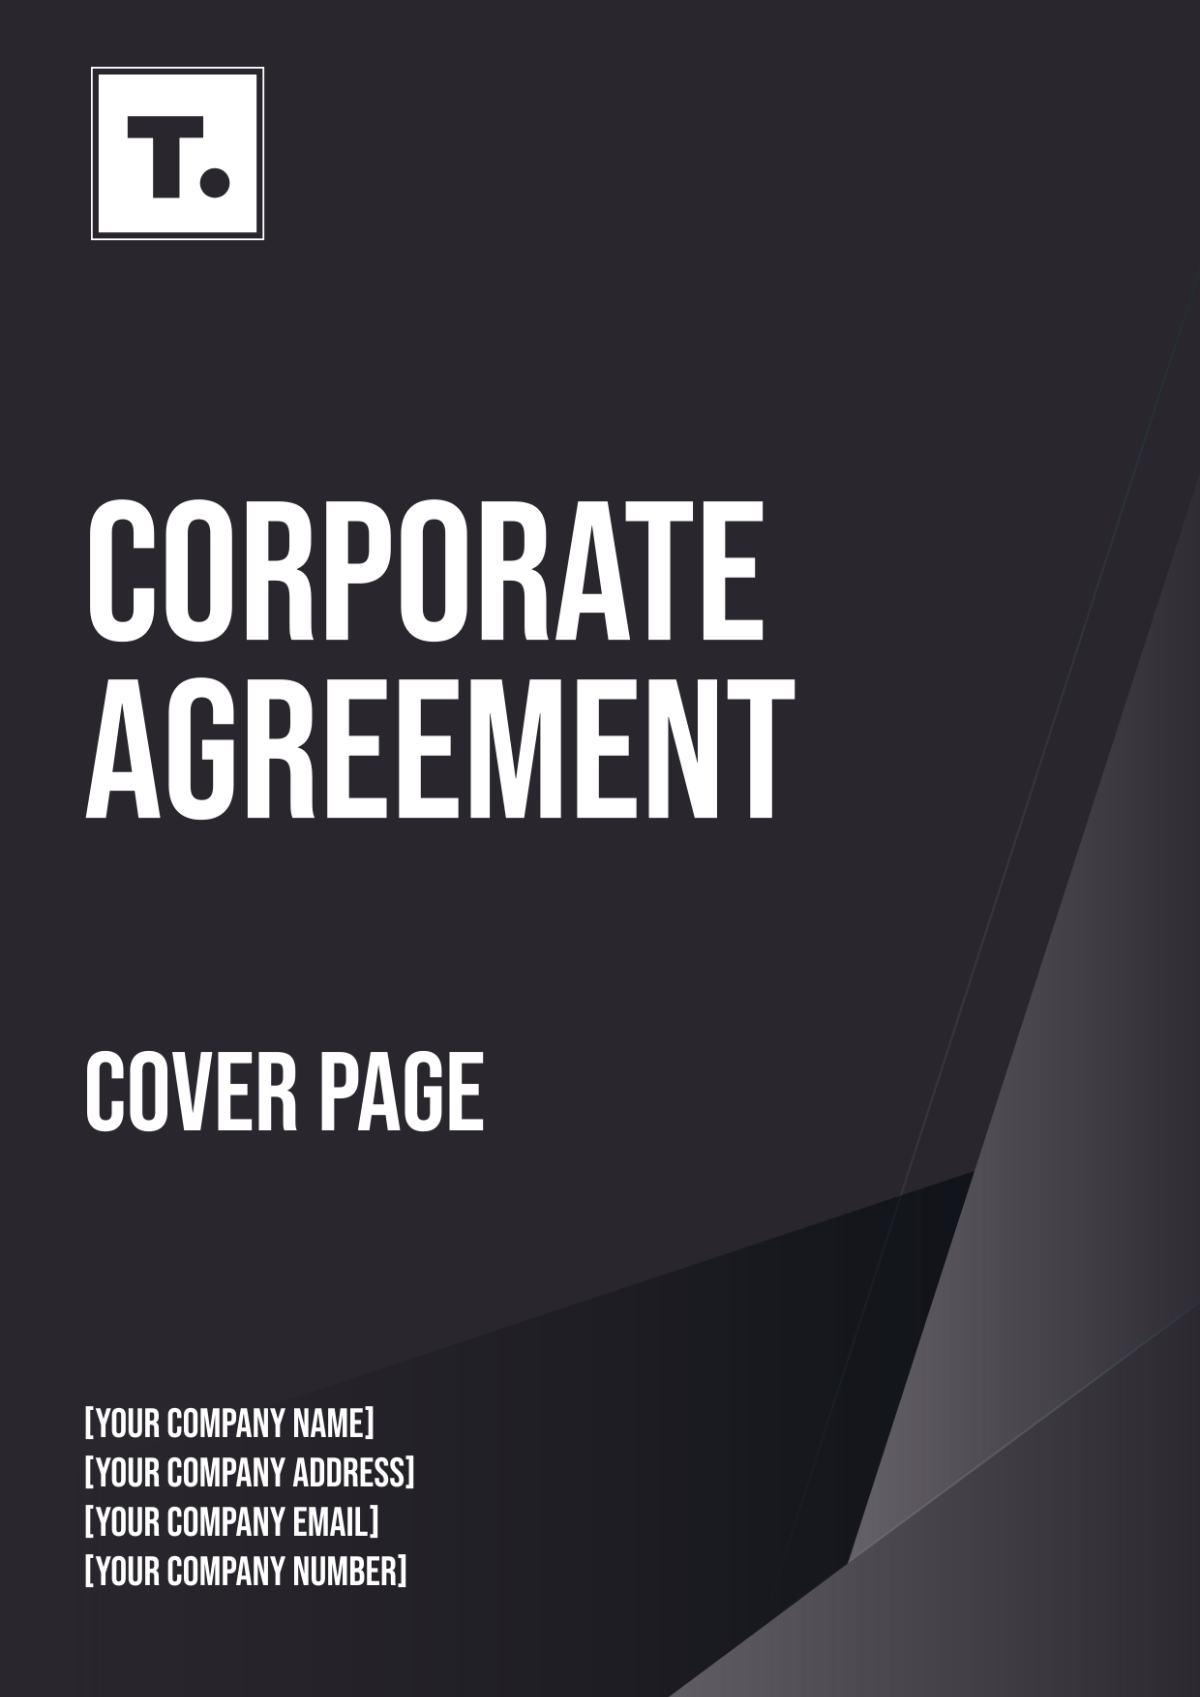 Corporate Agreement Cover Page